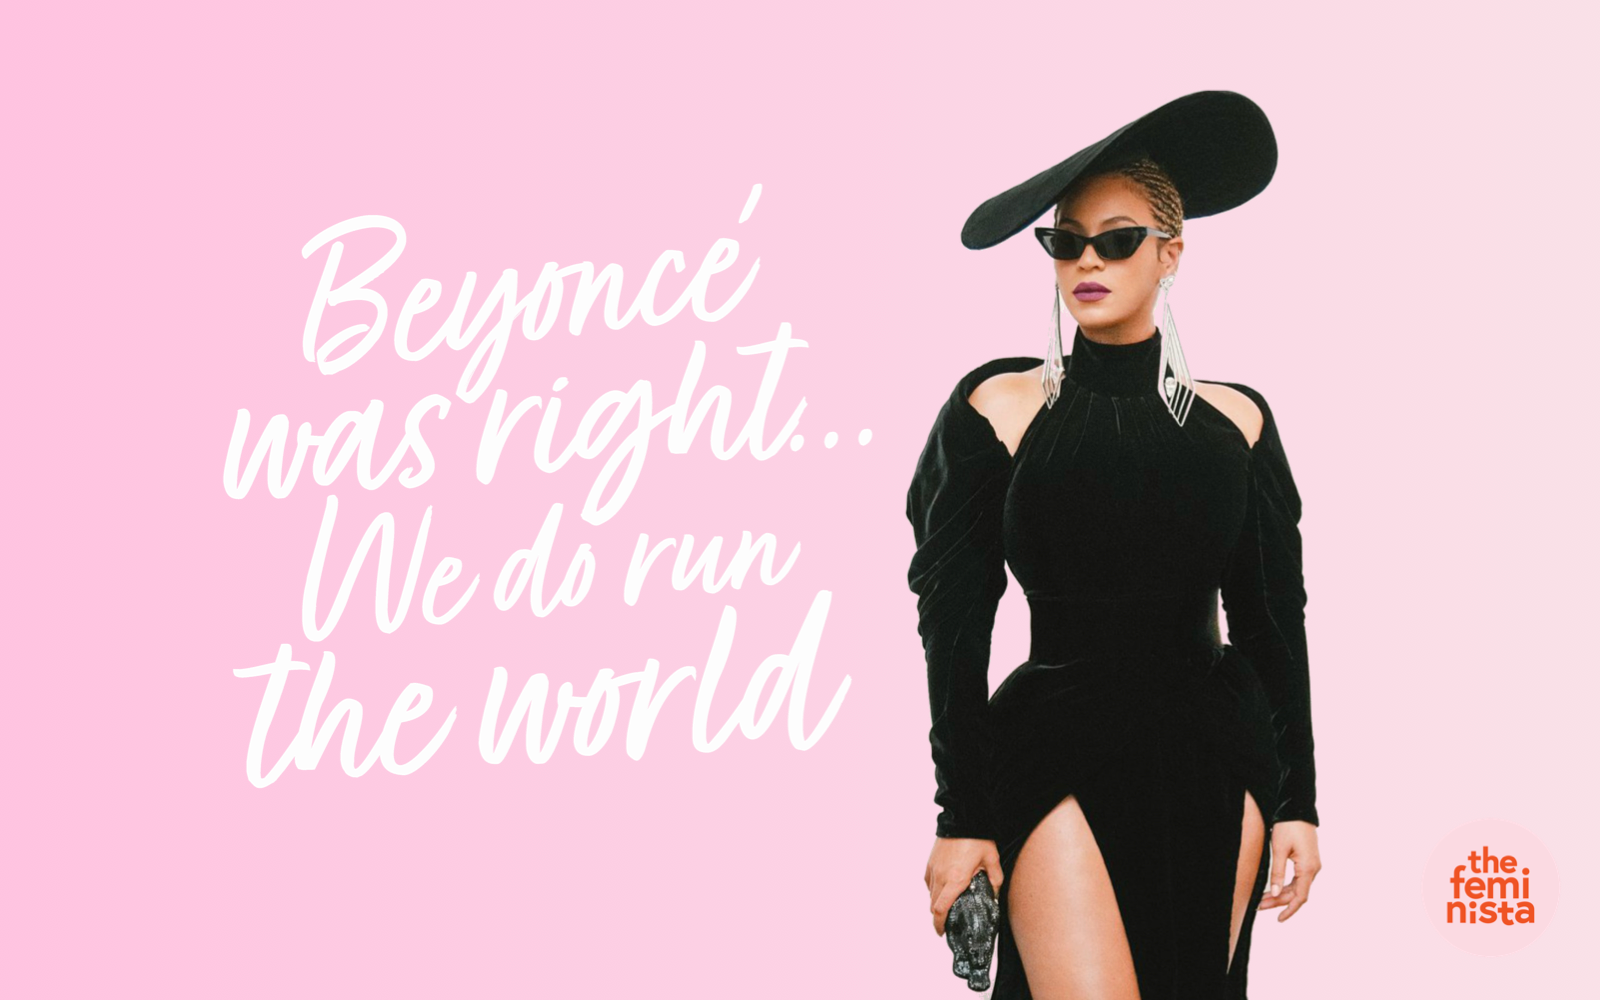 Beyoncé in sunglasses and a hat on a pink background with the words "Béyonce was right, we do run the world" and The Feminista logo